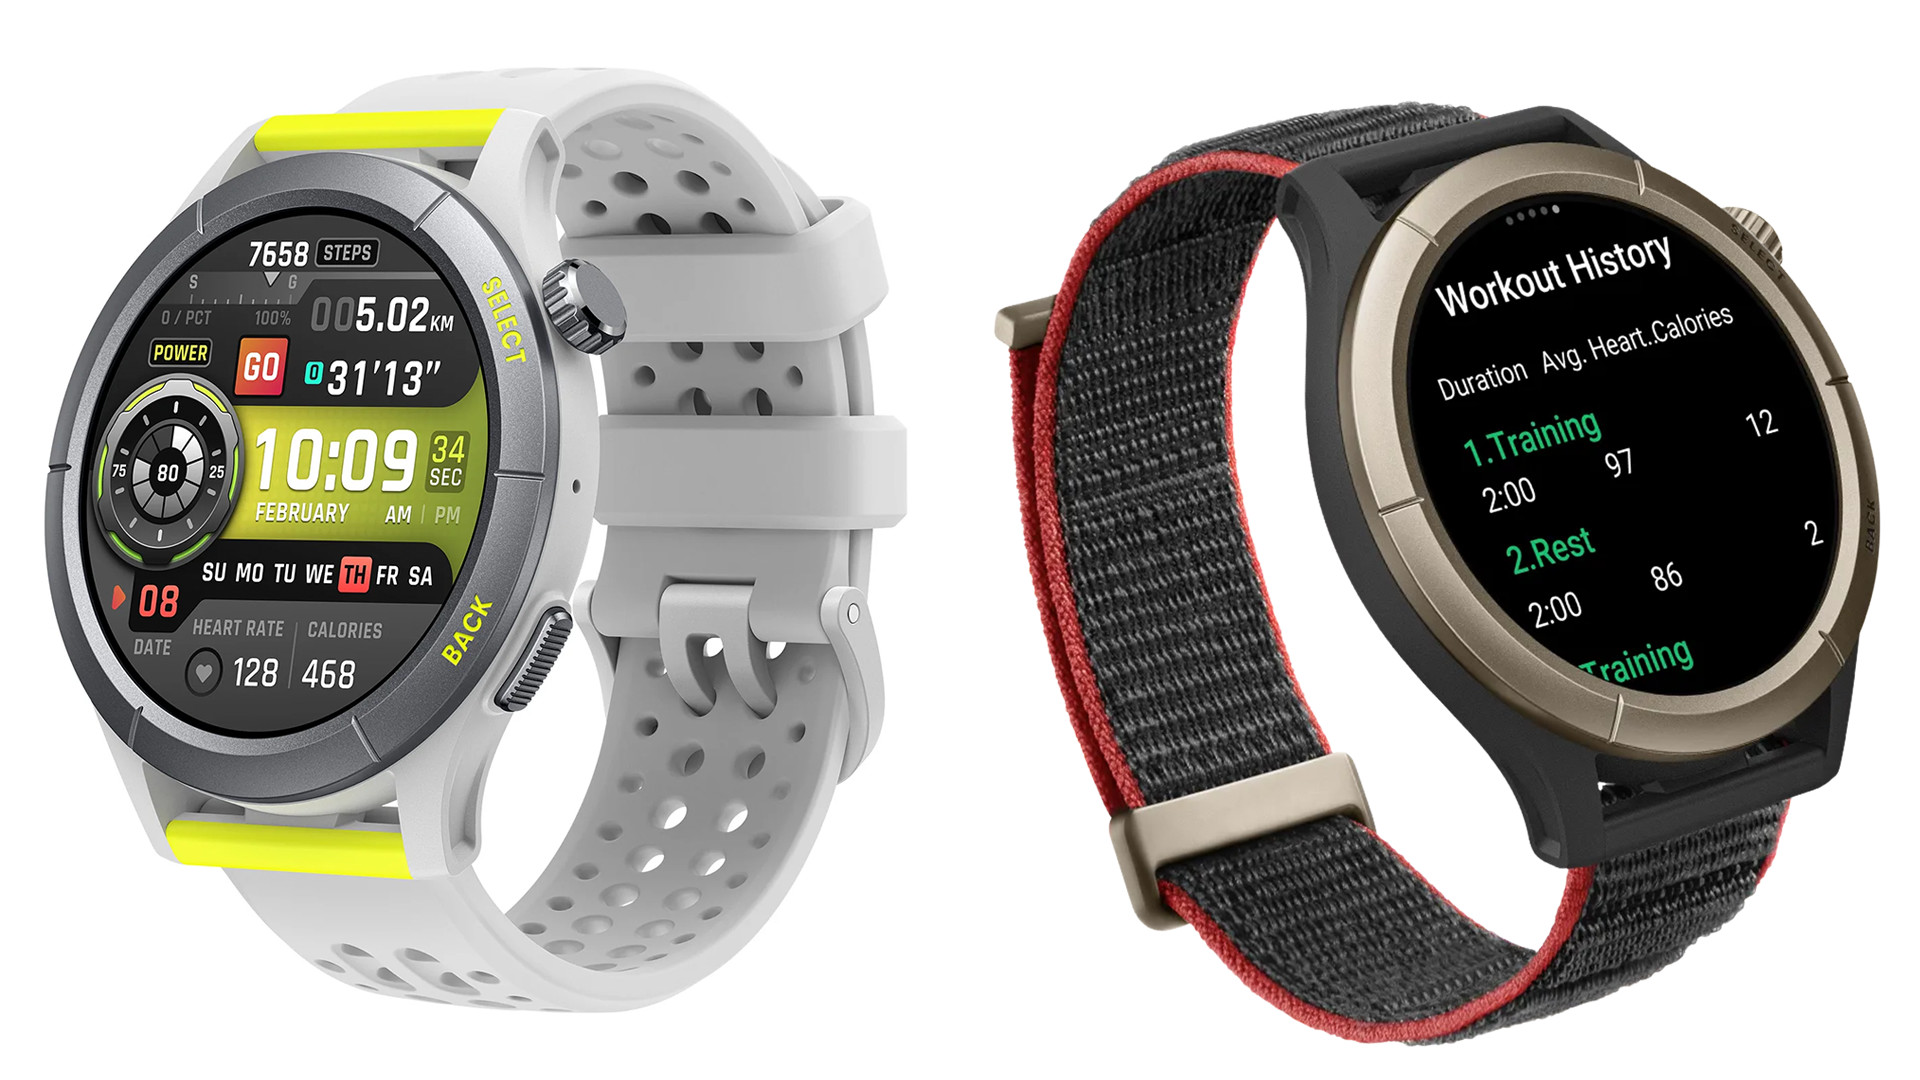 Amazfit’s new Cheetah running watches chase down Garmin with AI smarts ...